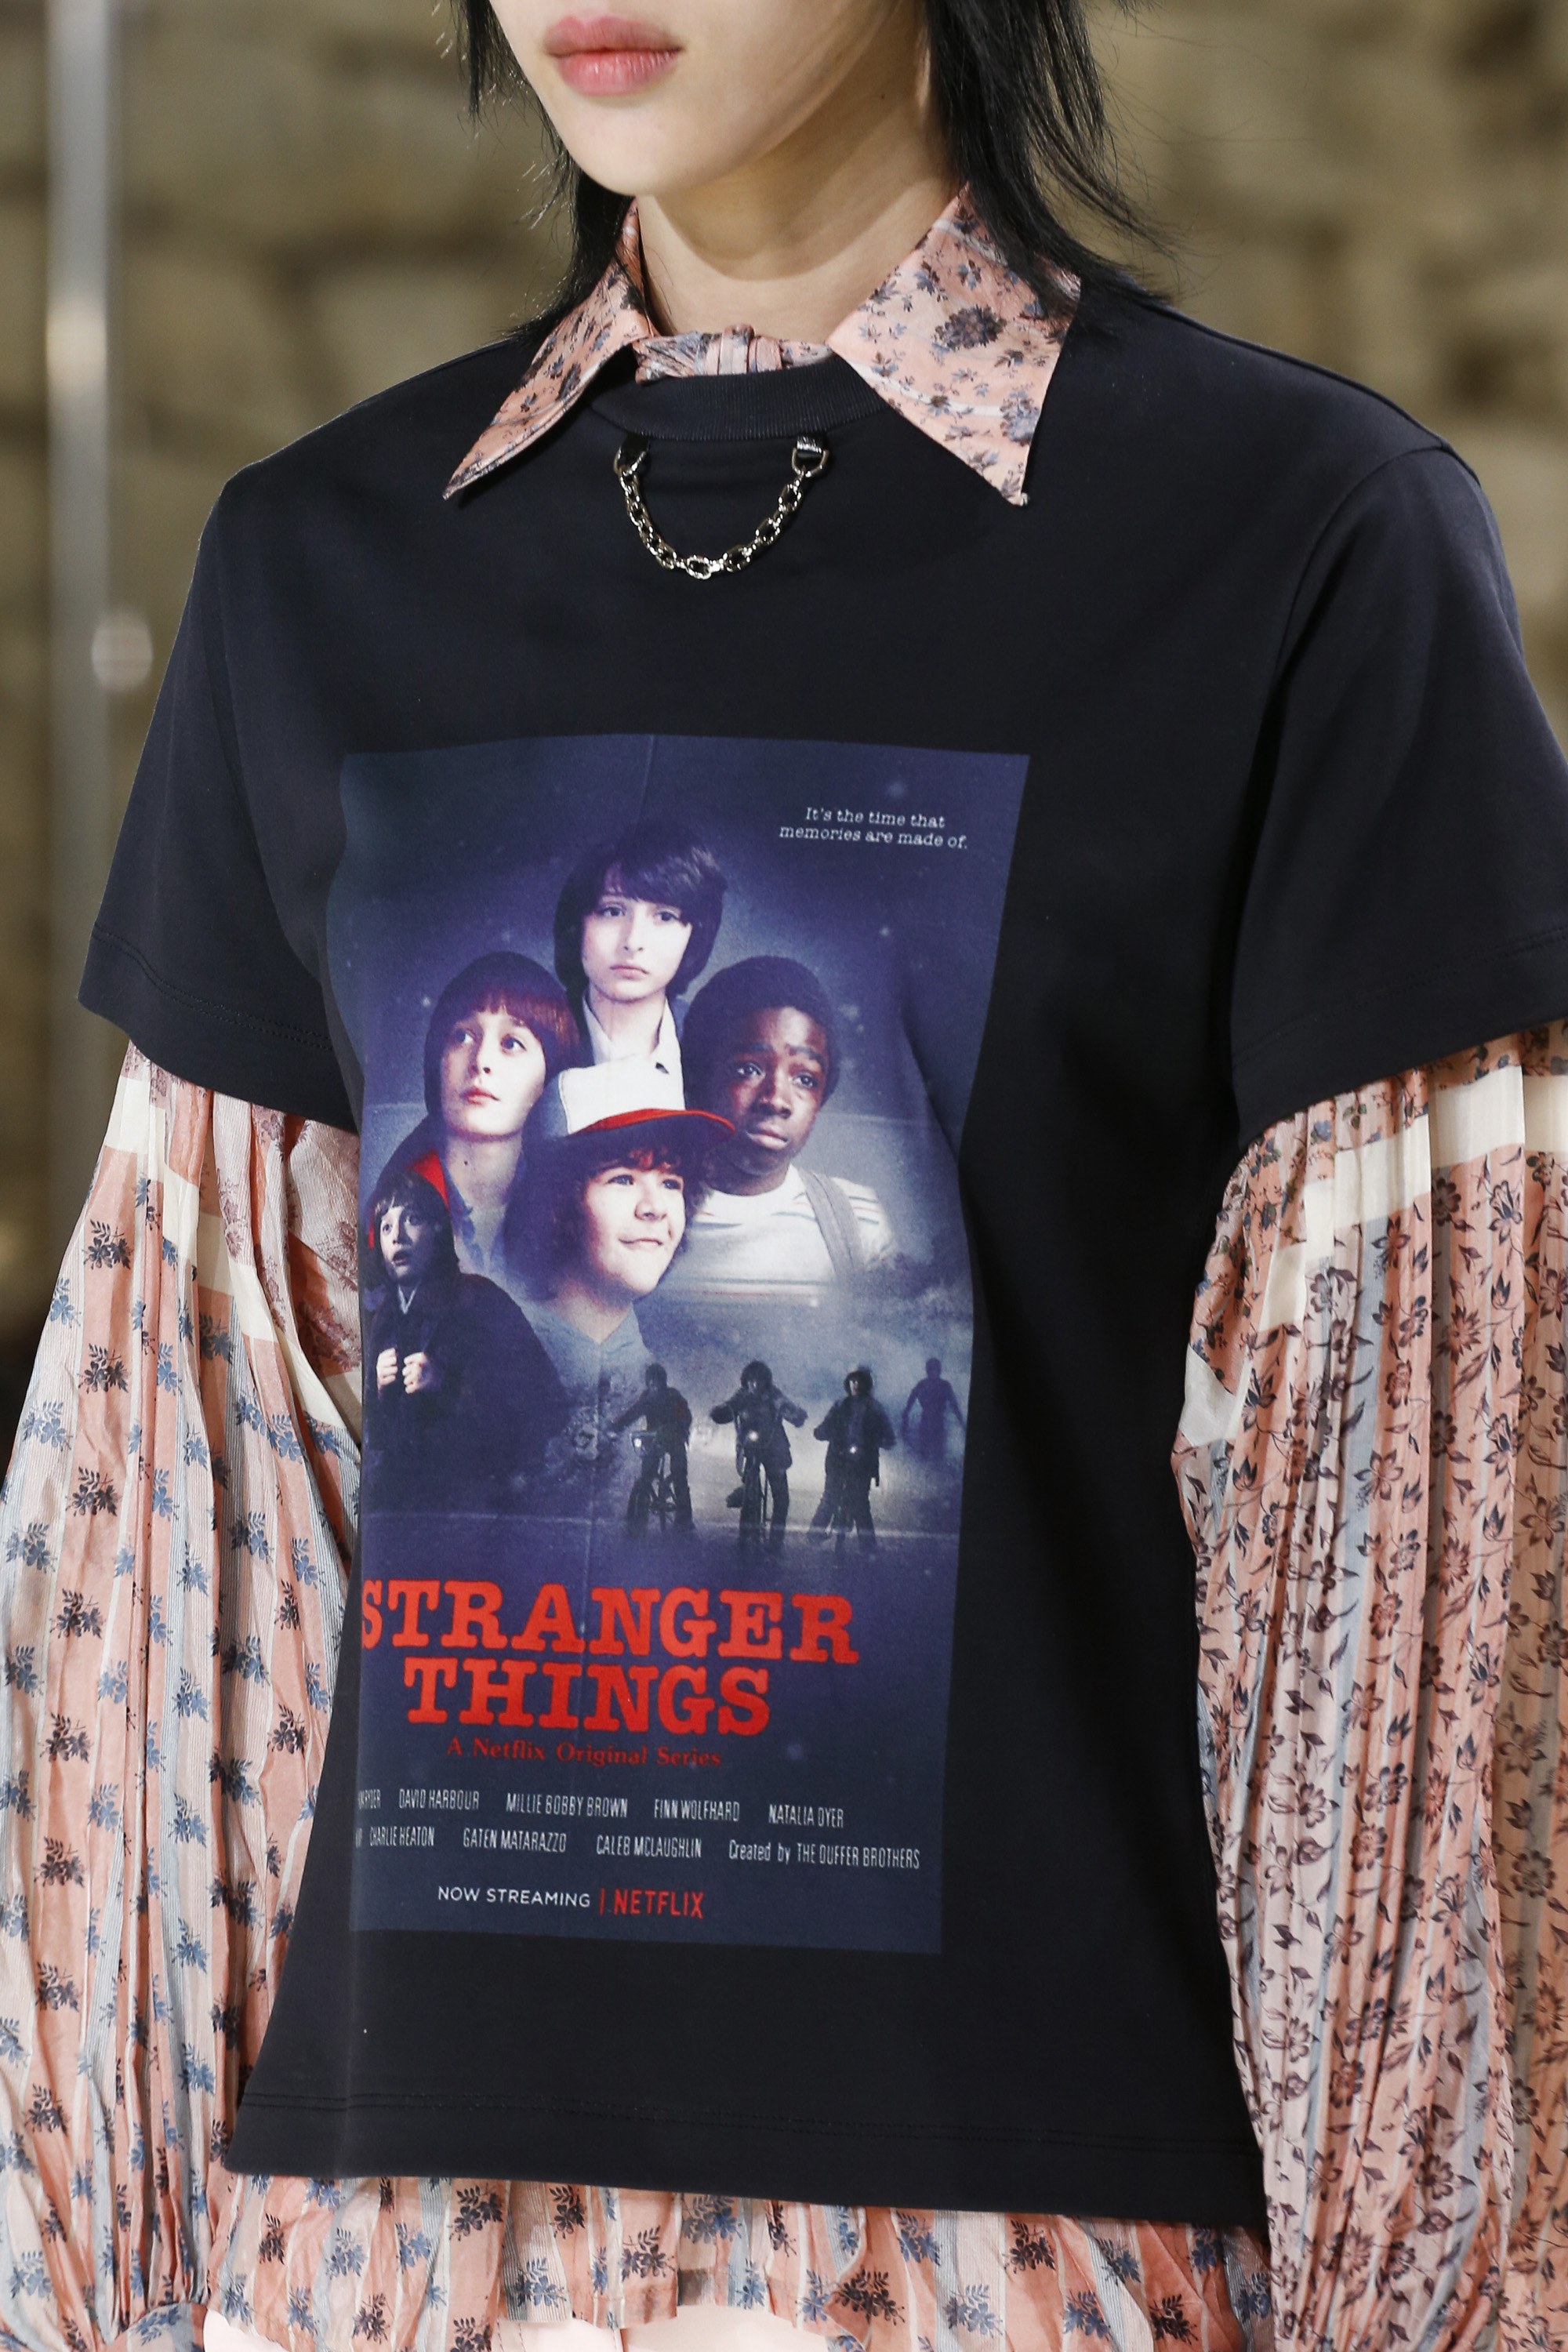 Louis Vuitton Debuted a 'Stranger Things' T-Shirt in 2023